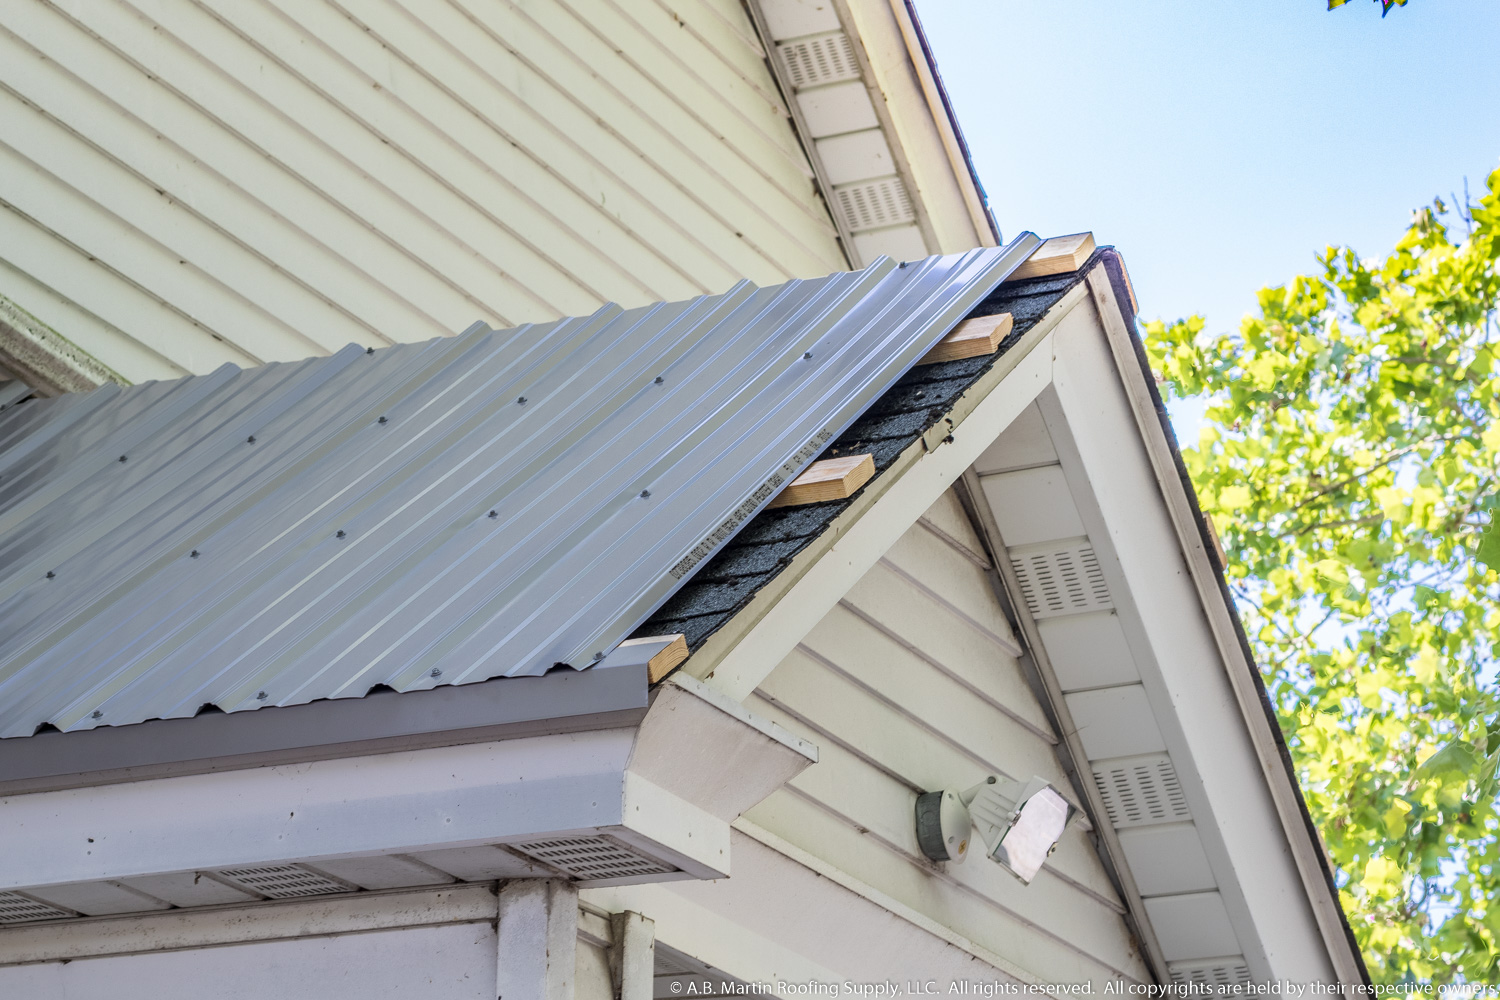 Is A Metal Roof Way More Noisy Than Shingles? - A.B. Martin Roofing Deck Makes Loud Noise When Cold